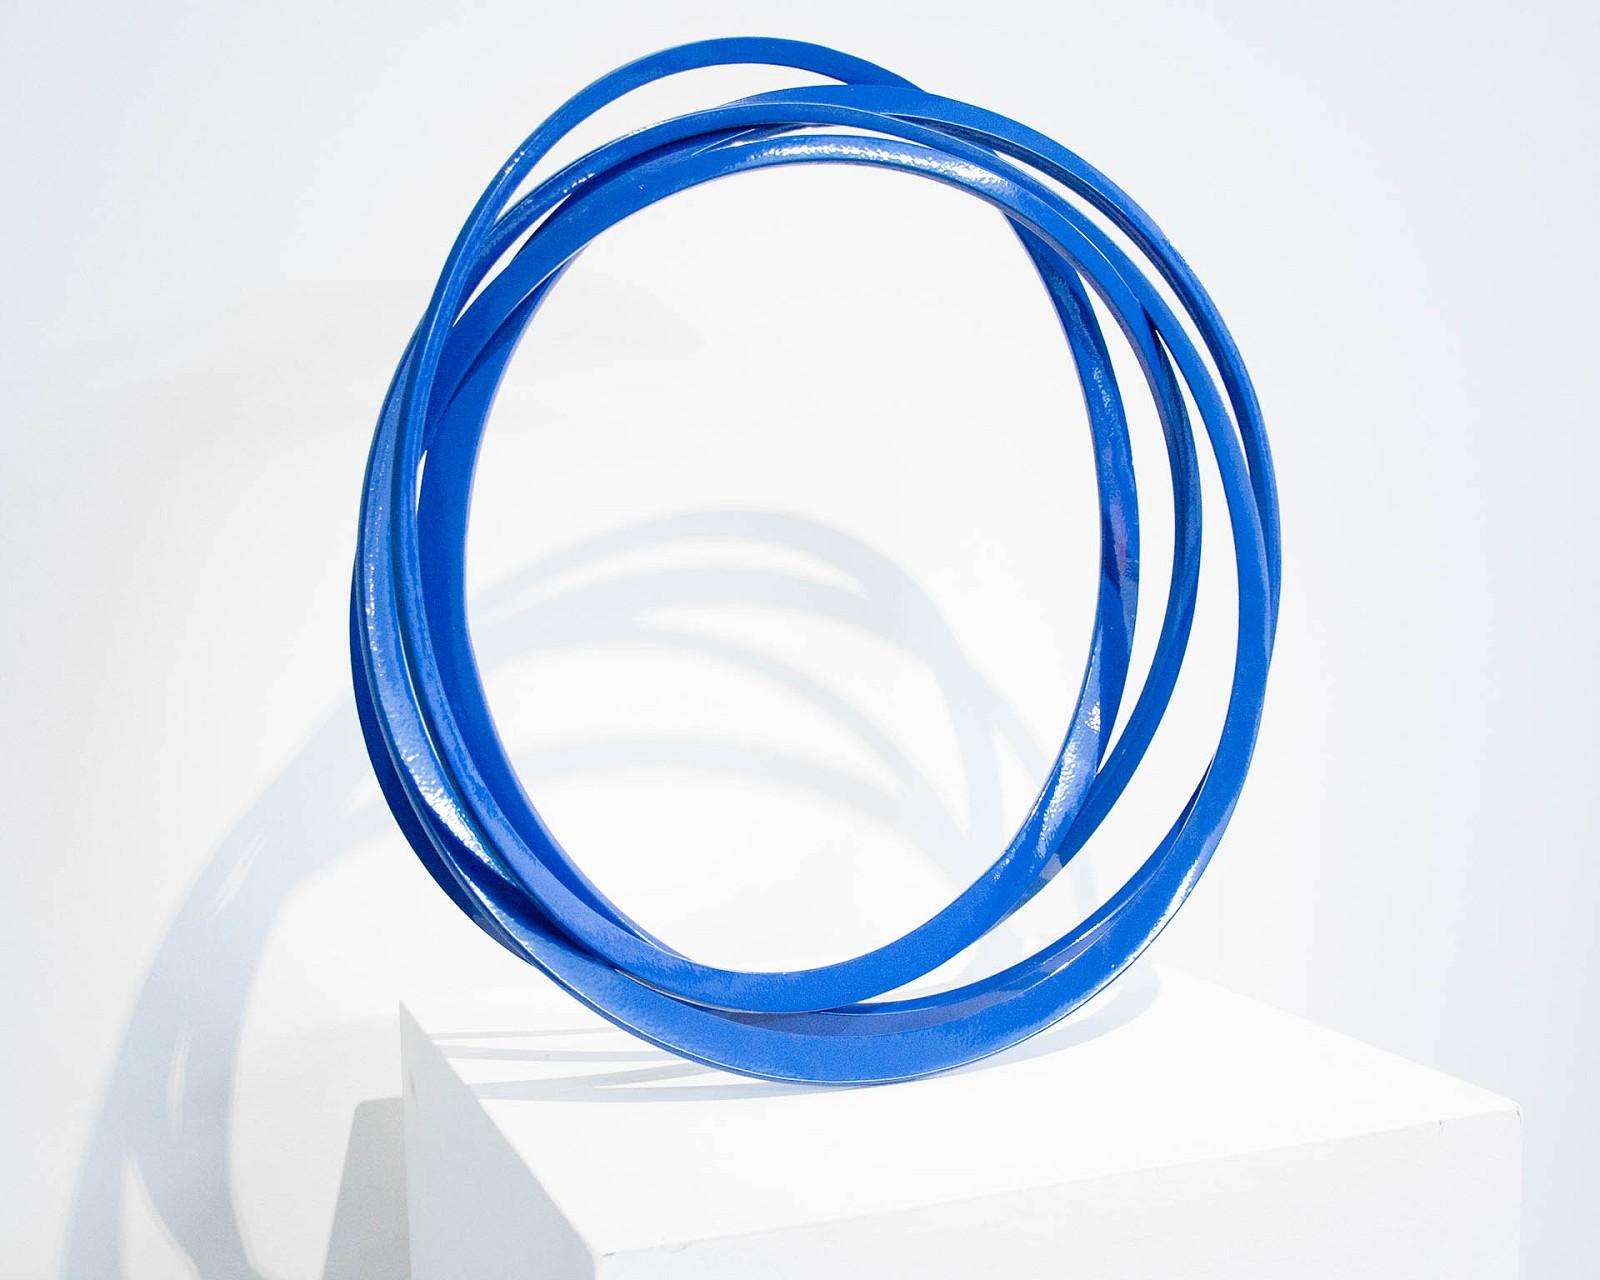 Elegant circular blue steel sculpture. The elements suggest movement and vibration, It also looks as if it might roll, spin, wobble or topple at any moment but, of course, it does not. This work is one of several composed of circles and recently